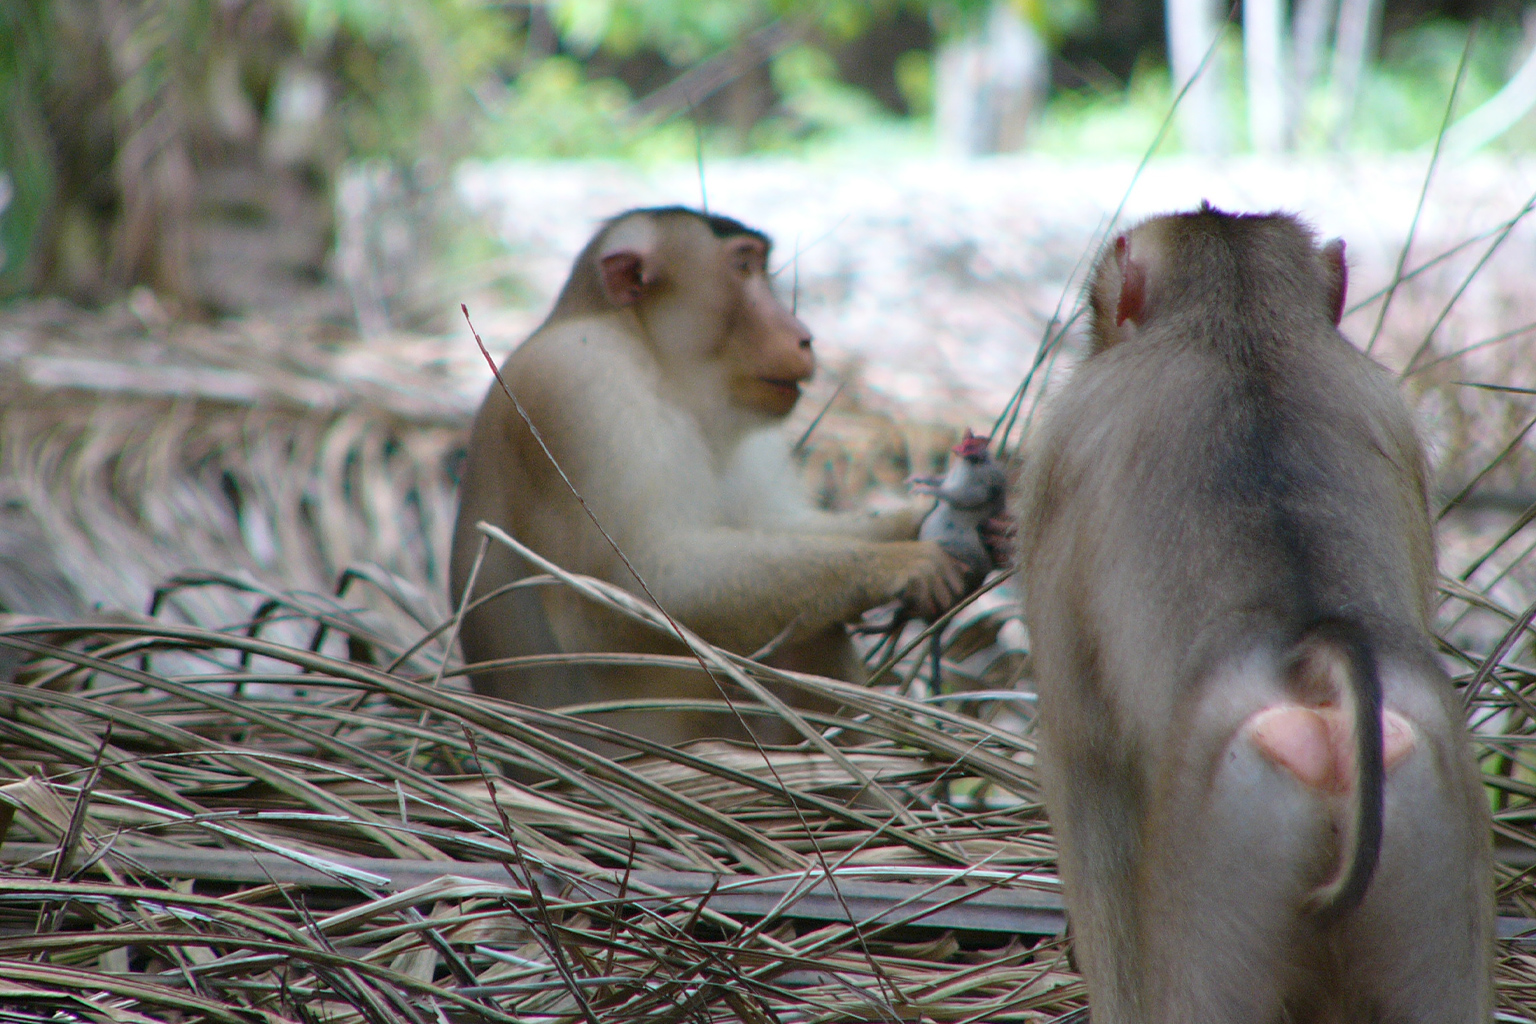 Pig tailed macaques.